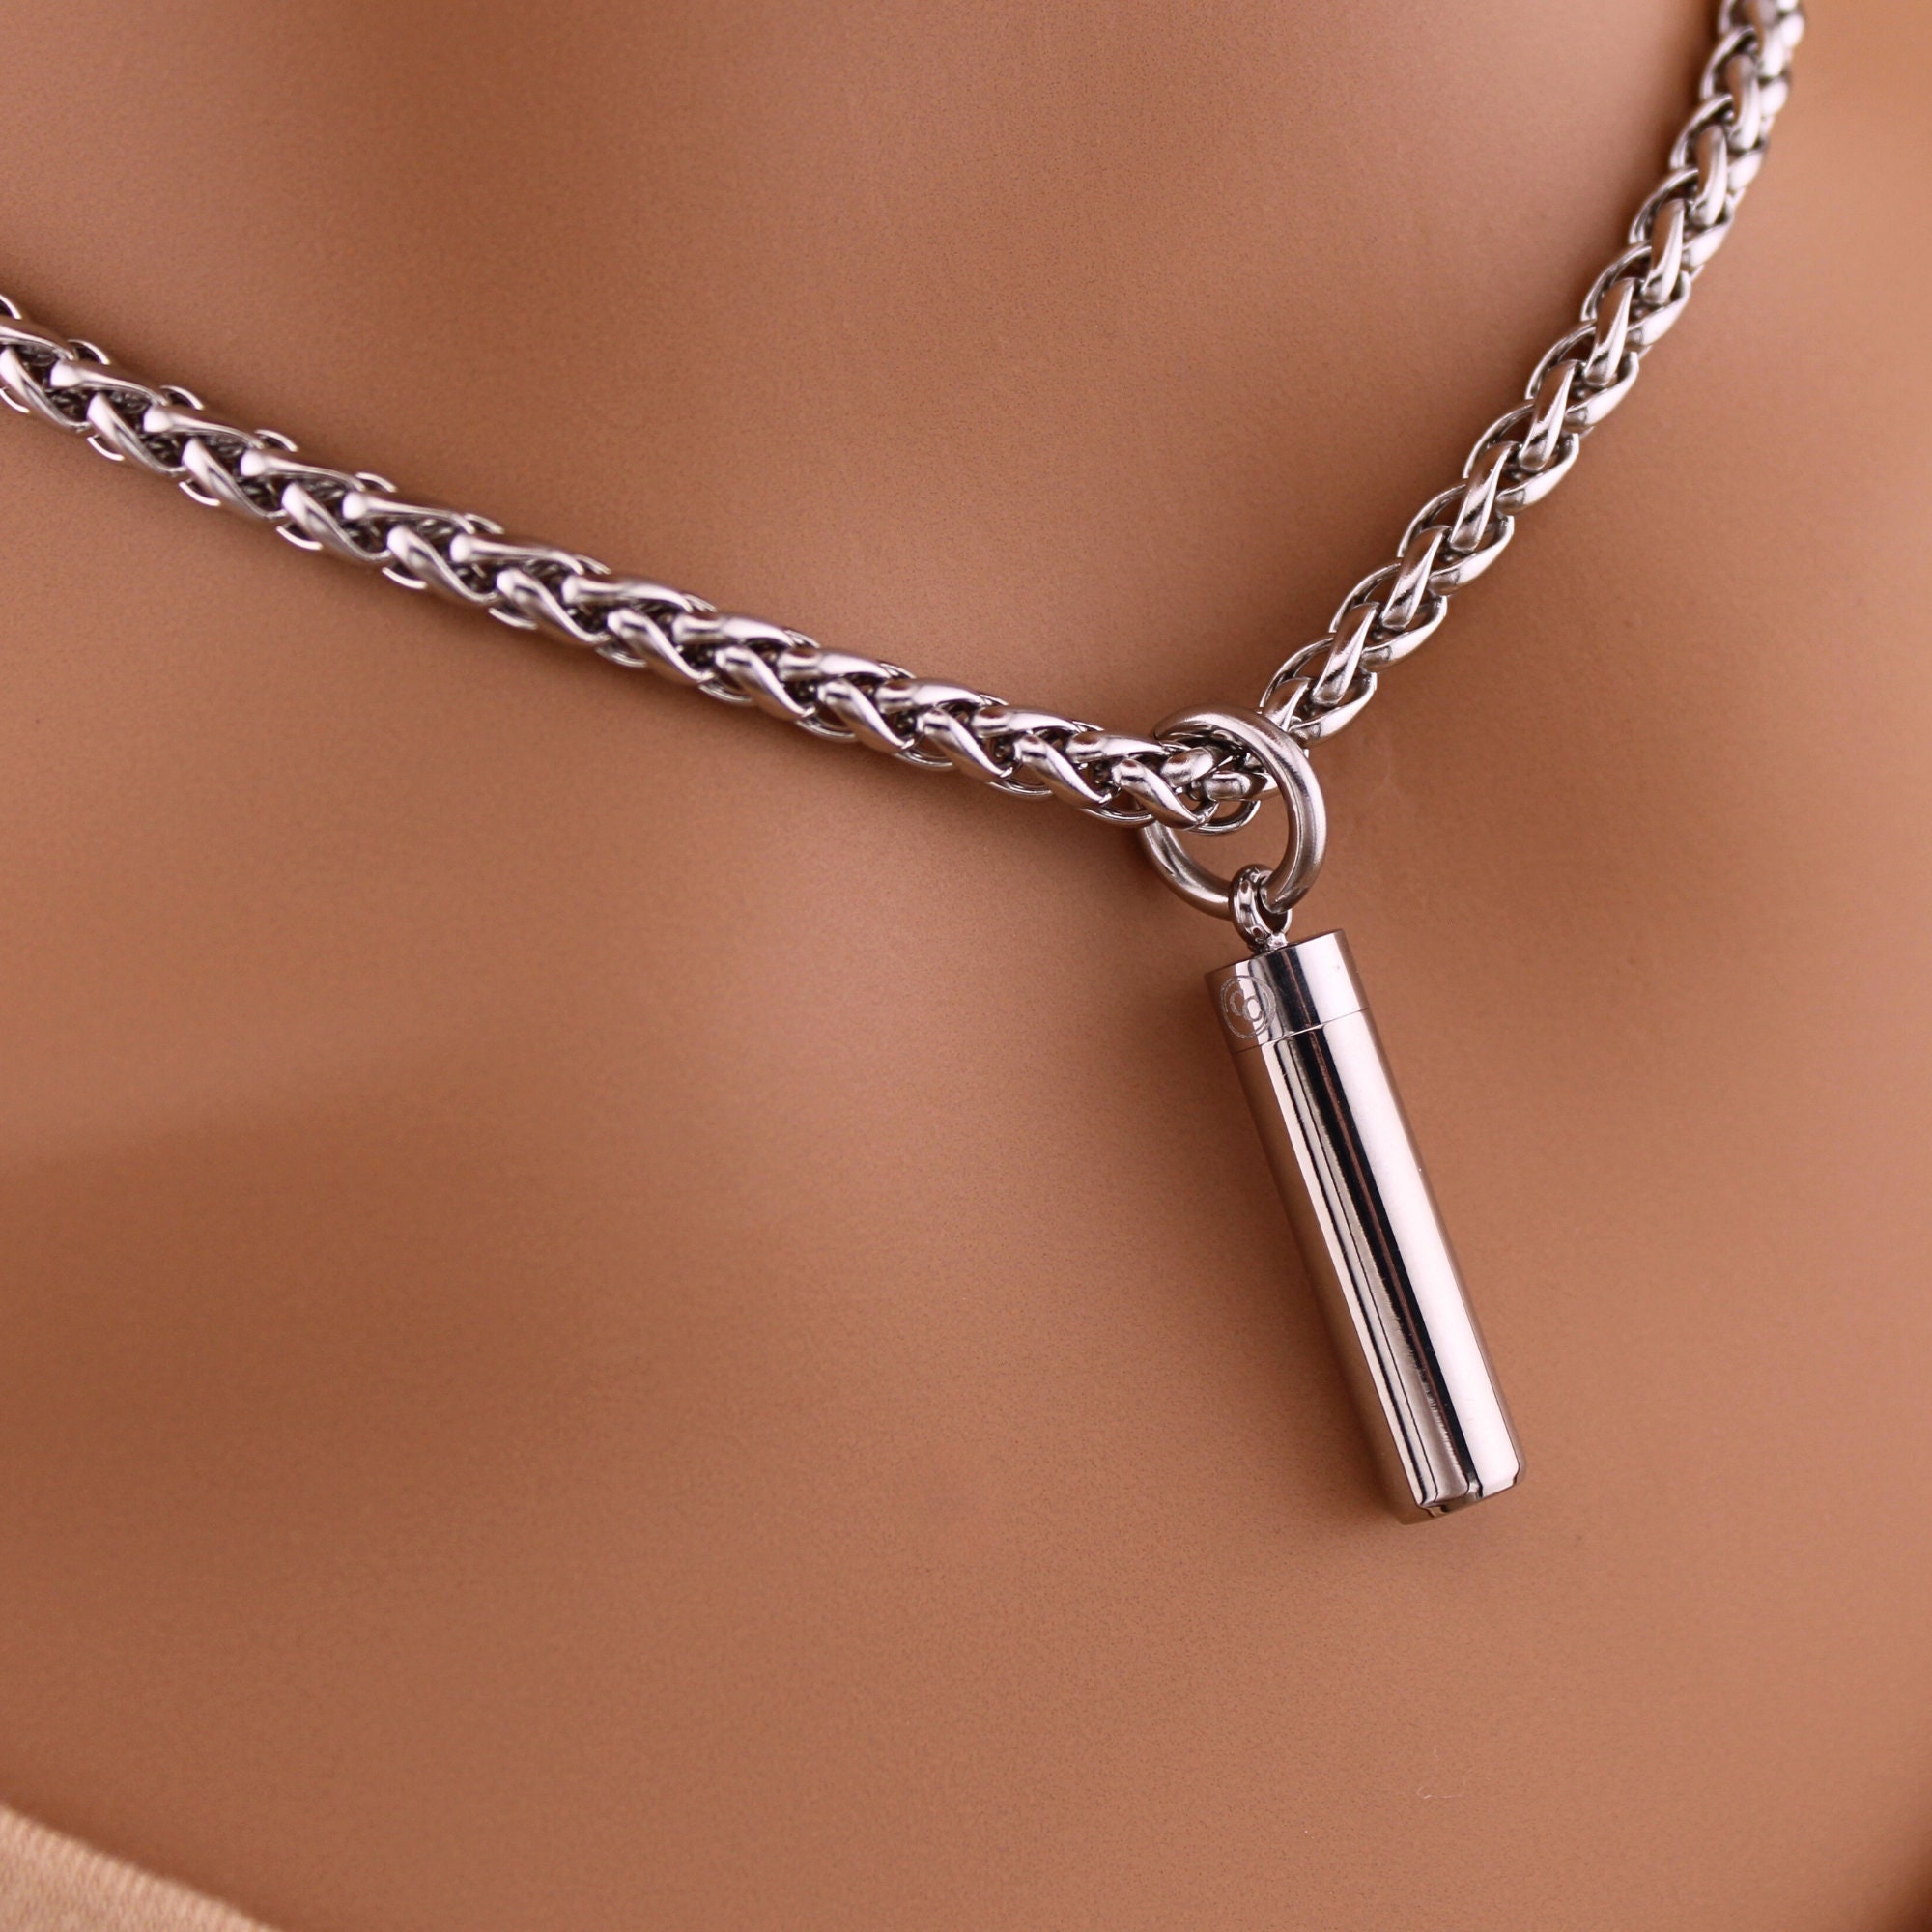 Pure Silver S925 Sterling Silver Clasp Weave Leather Long Chain Necklace  With Silver Lock For Men Male Women Jewelry Accessory - Necklaces -  AliExpress